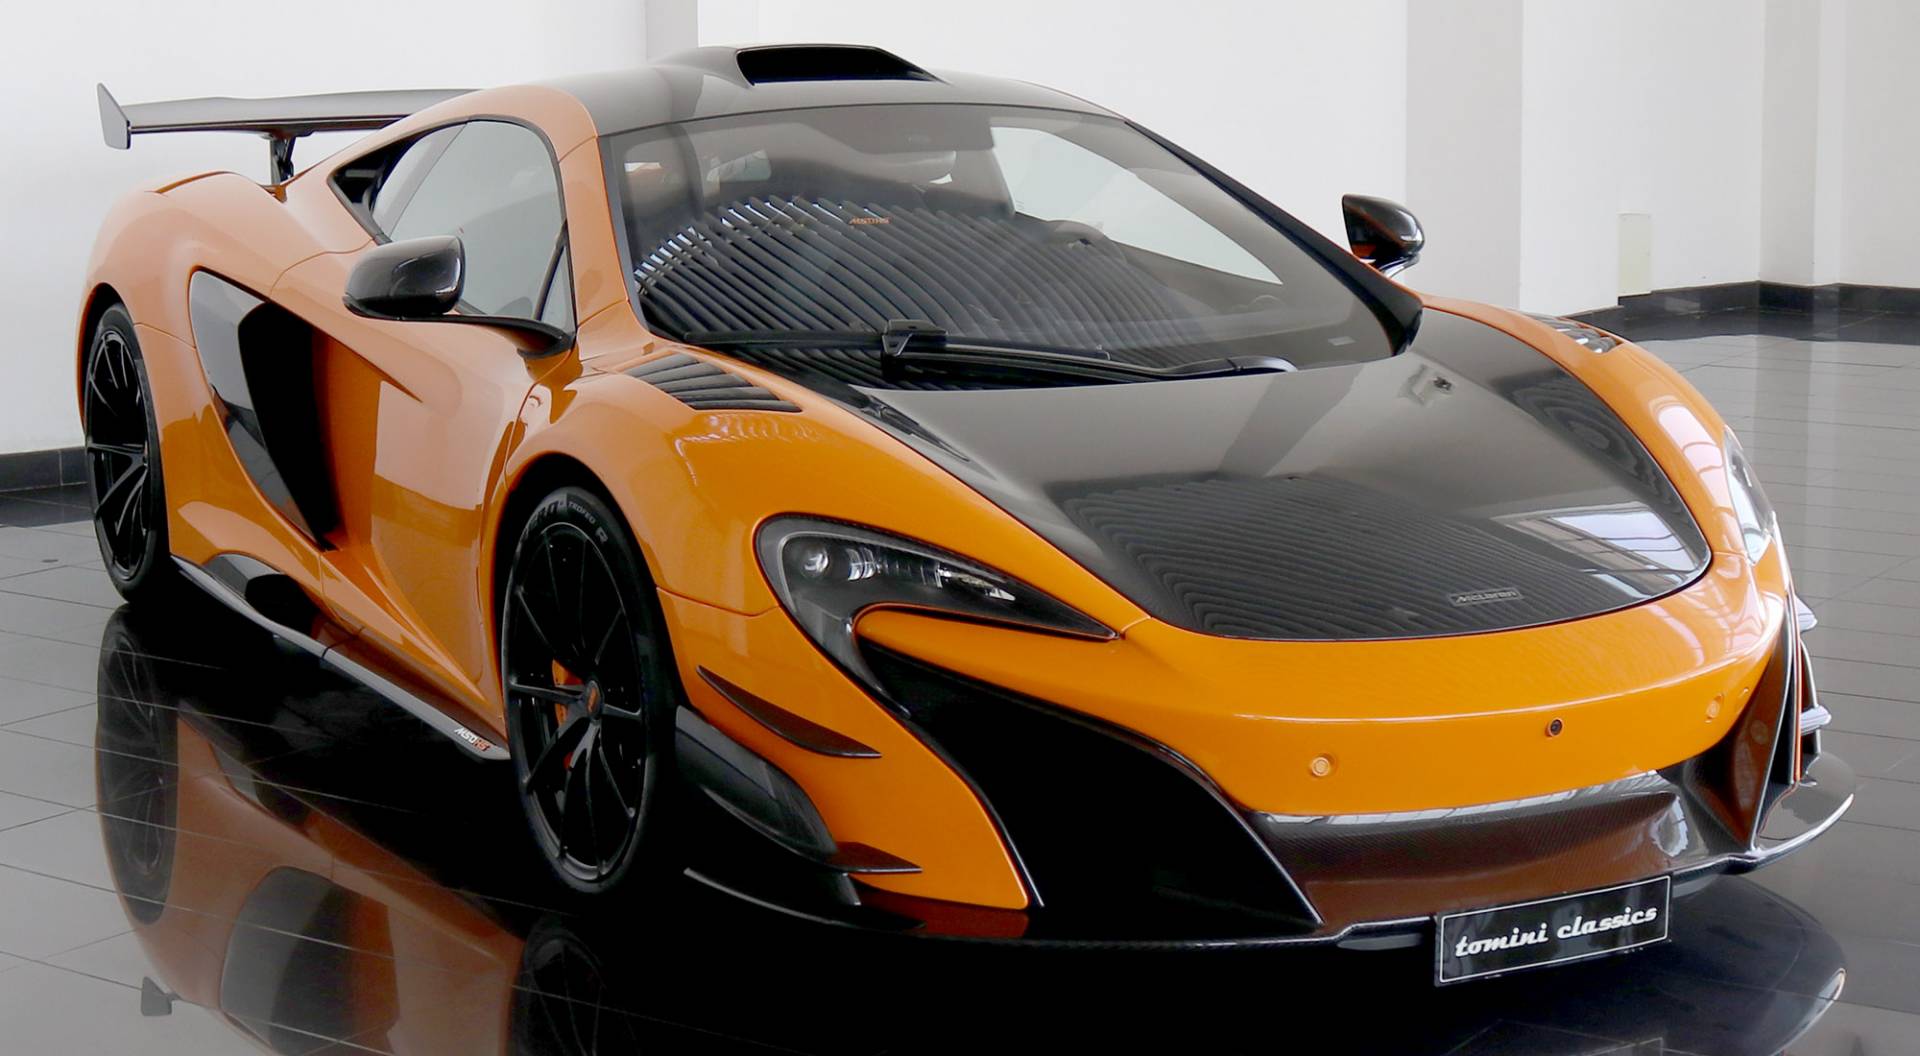 For Sale McLaren 688 HS MSO 2016 Offered For AUD 799 305